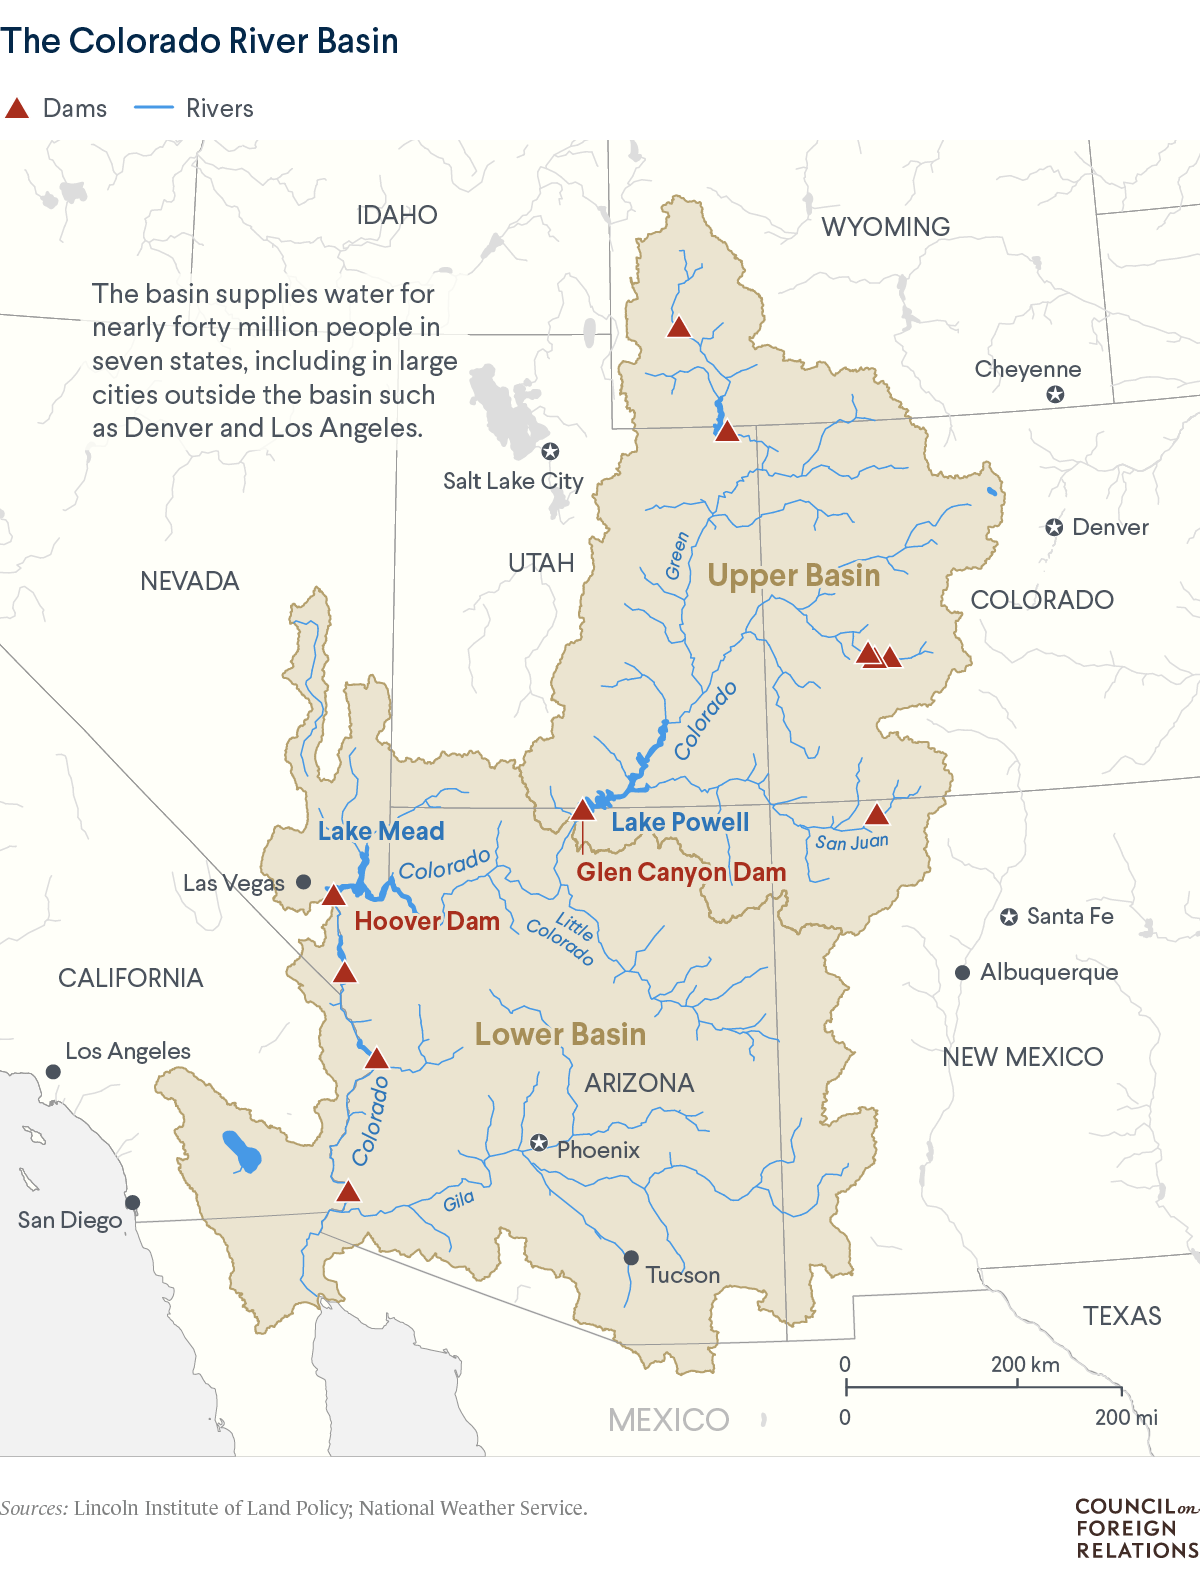 A map of the Colorado River Basin, which covers seven states and supplies water to large metro areas including Denver and Los Angeles